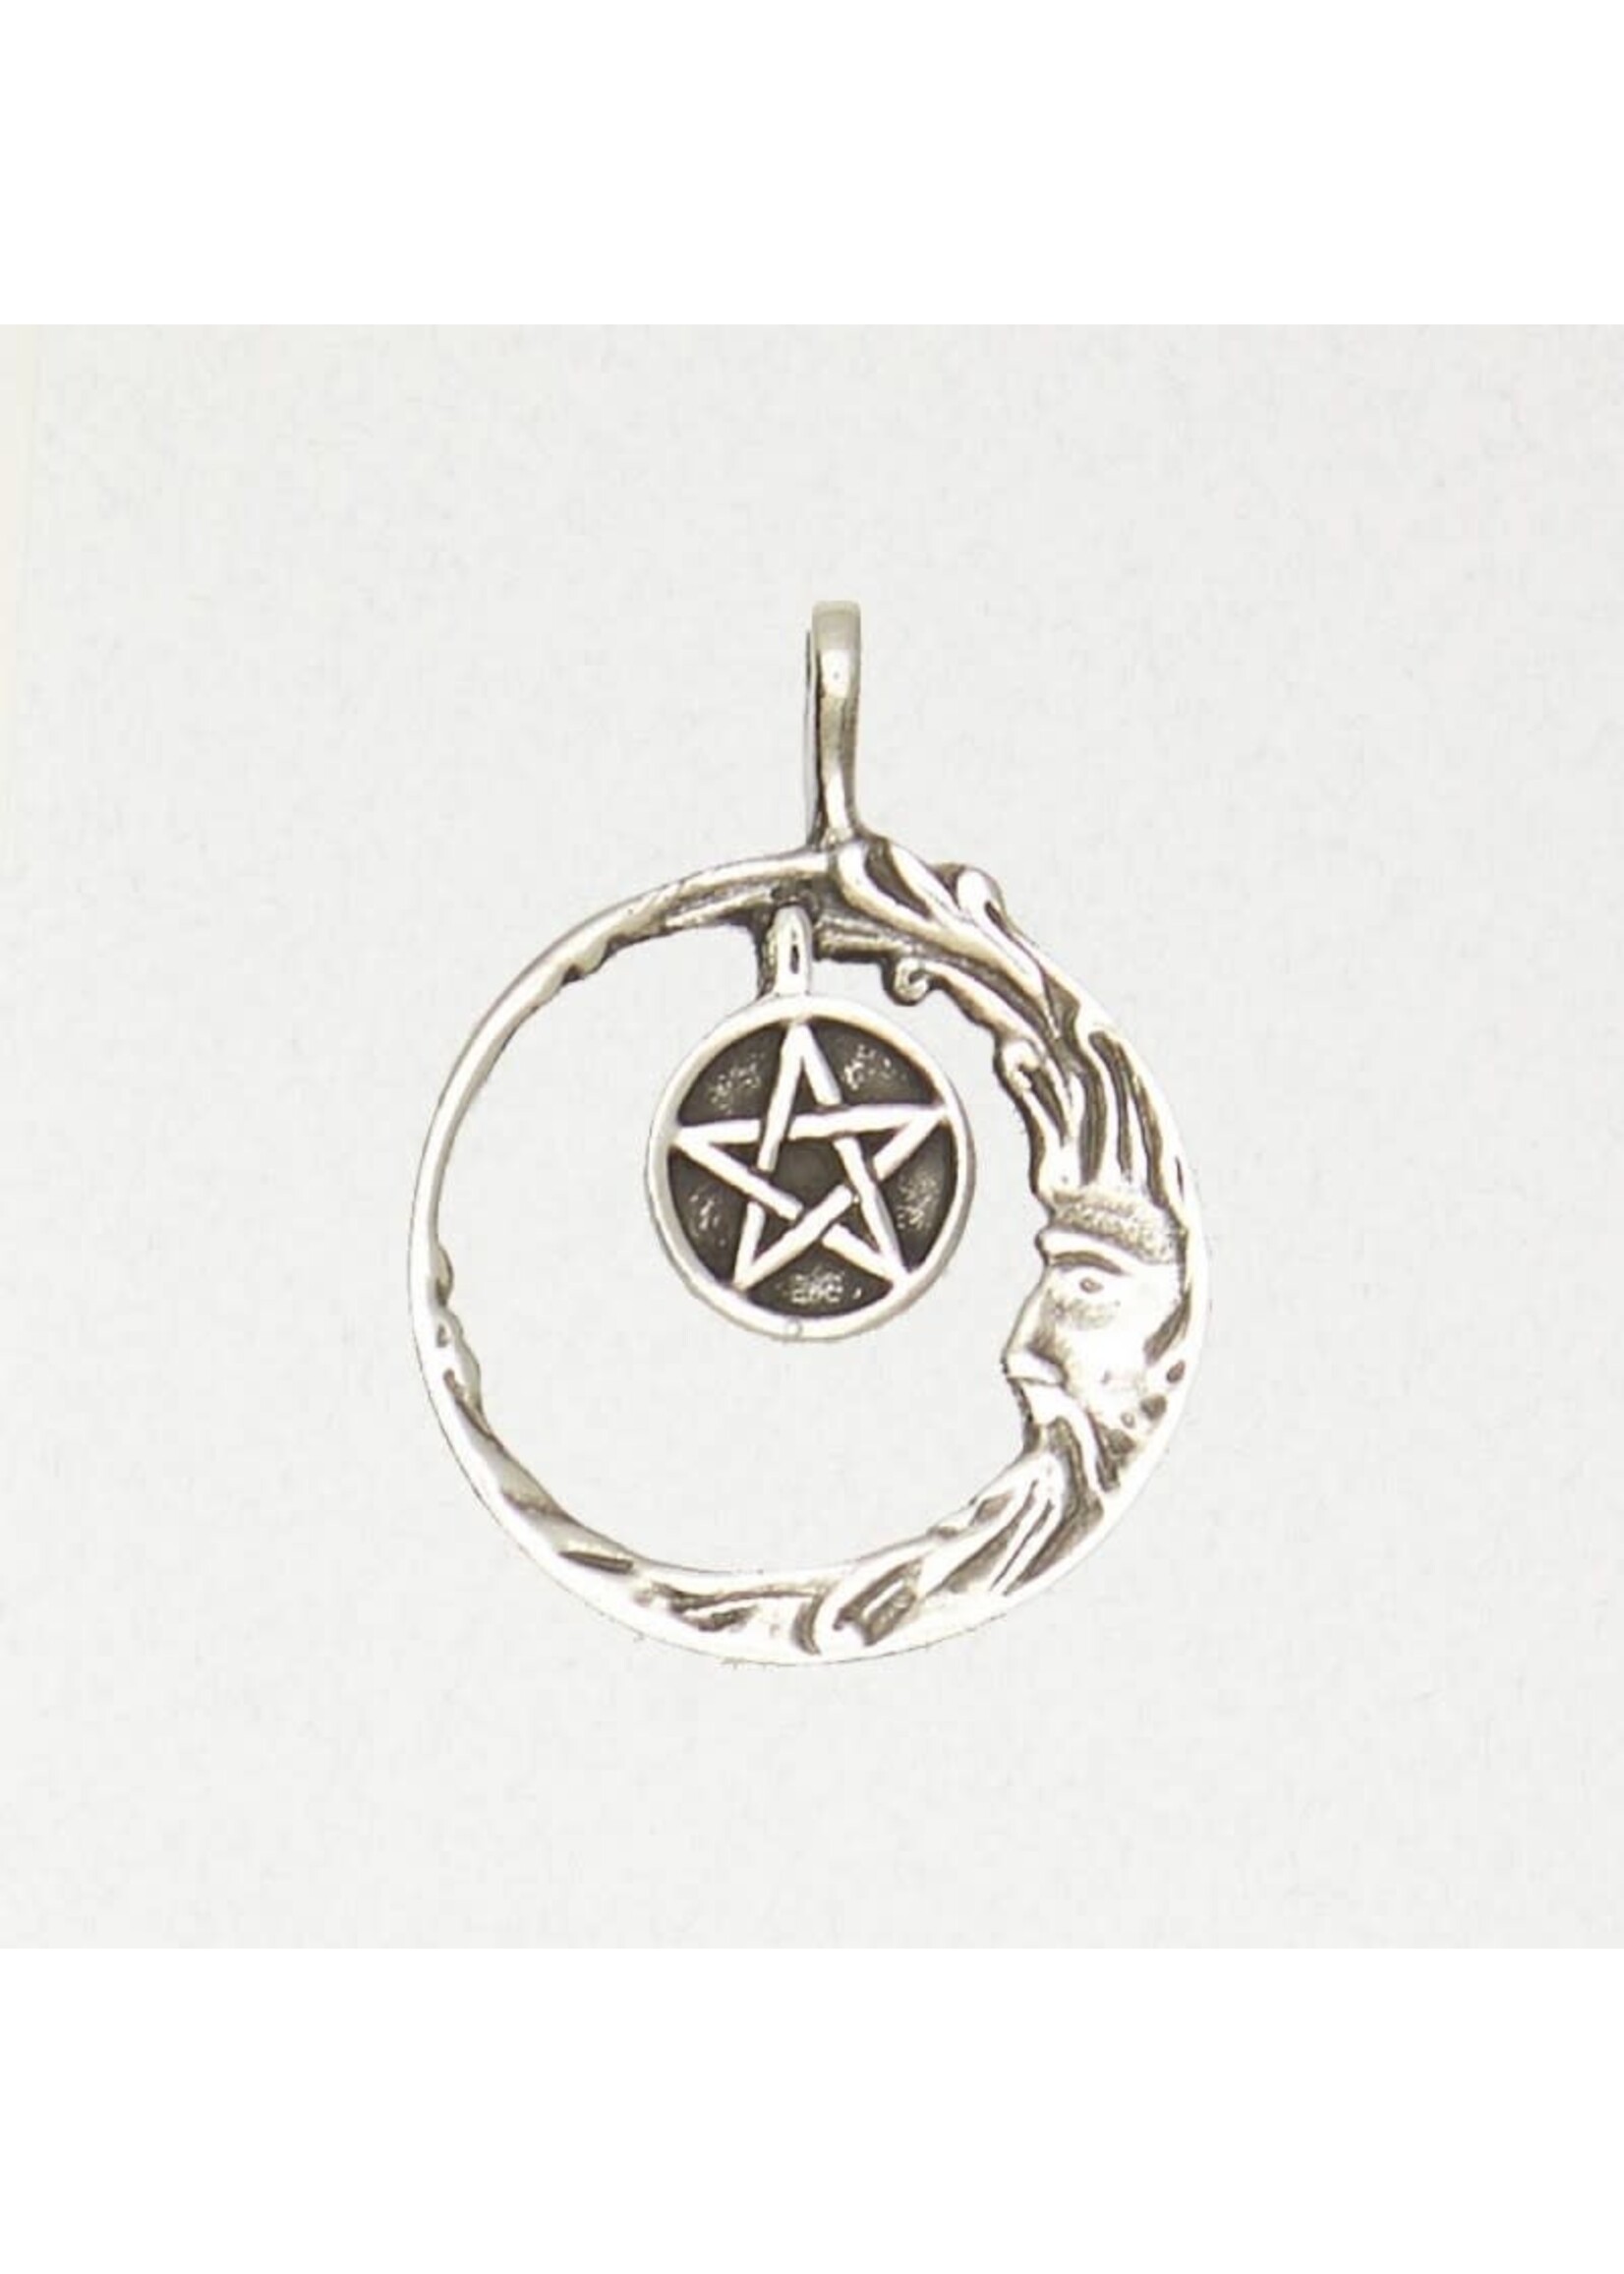 Wicca Pewter Pendant - Crescent Moon Pentacle